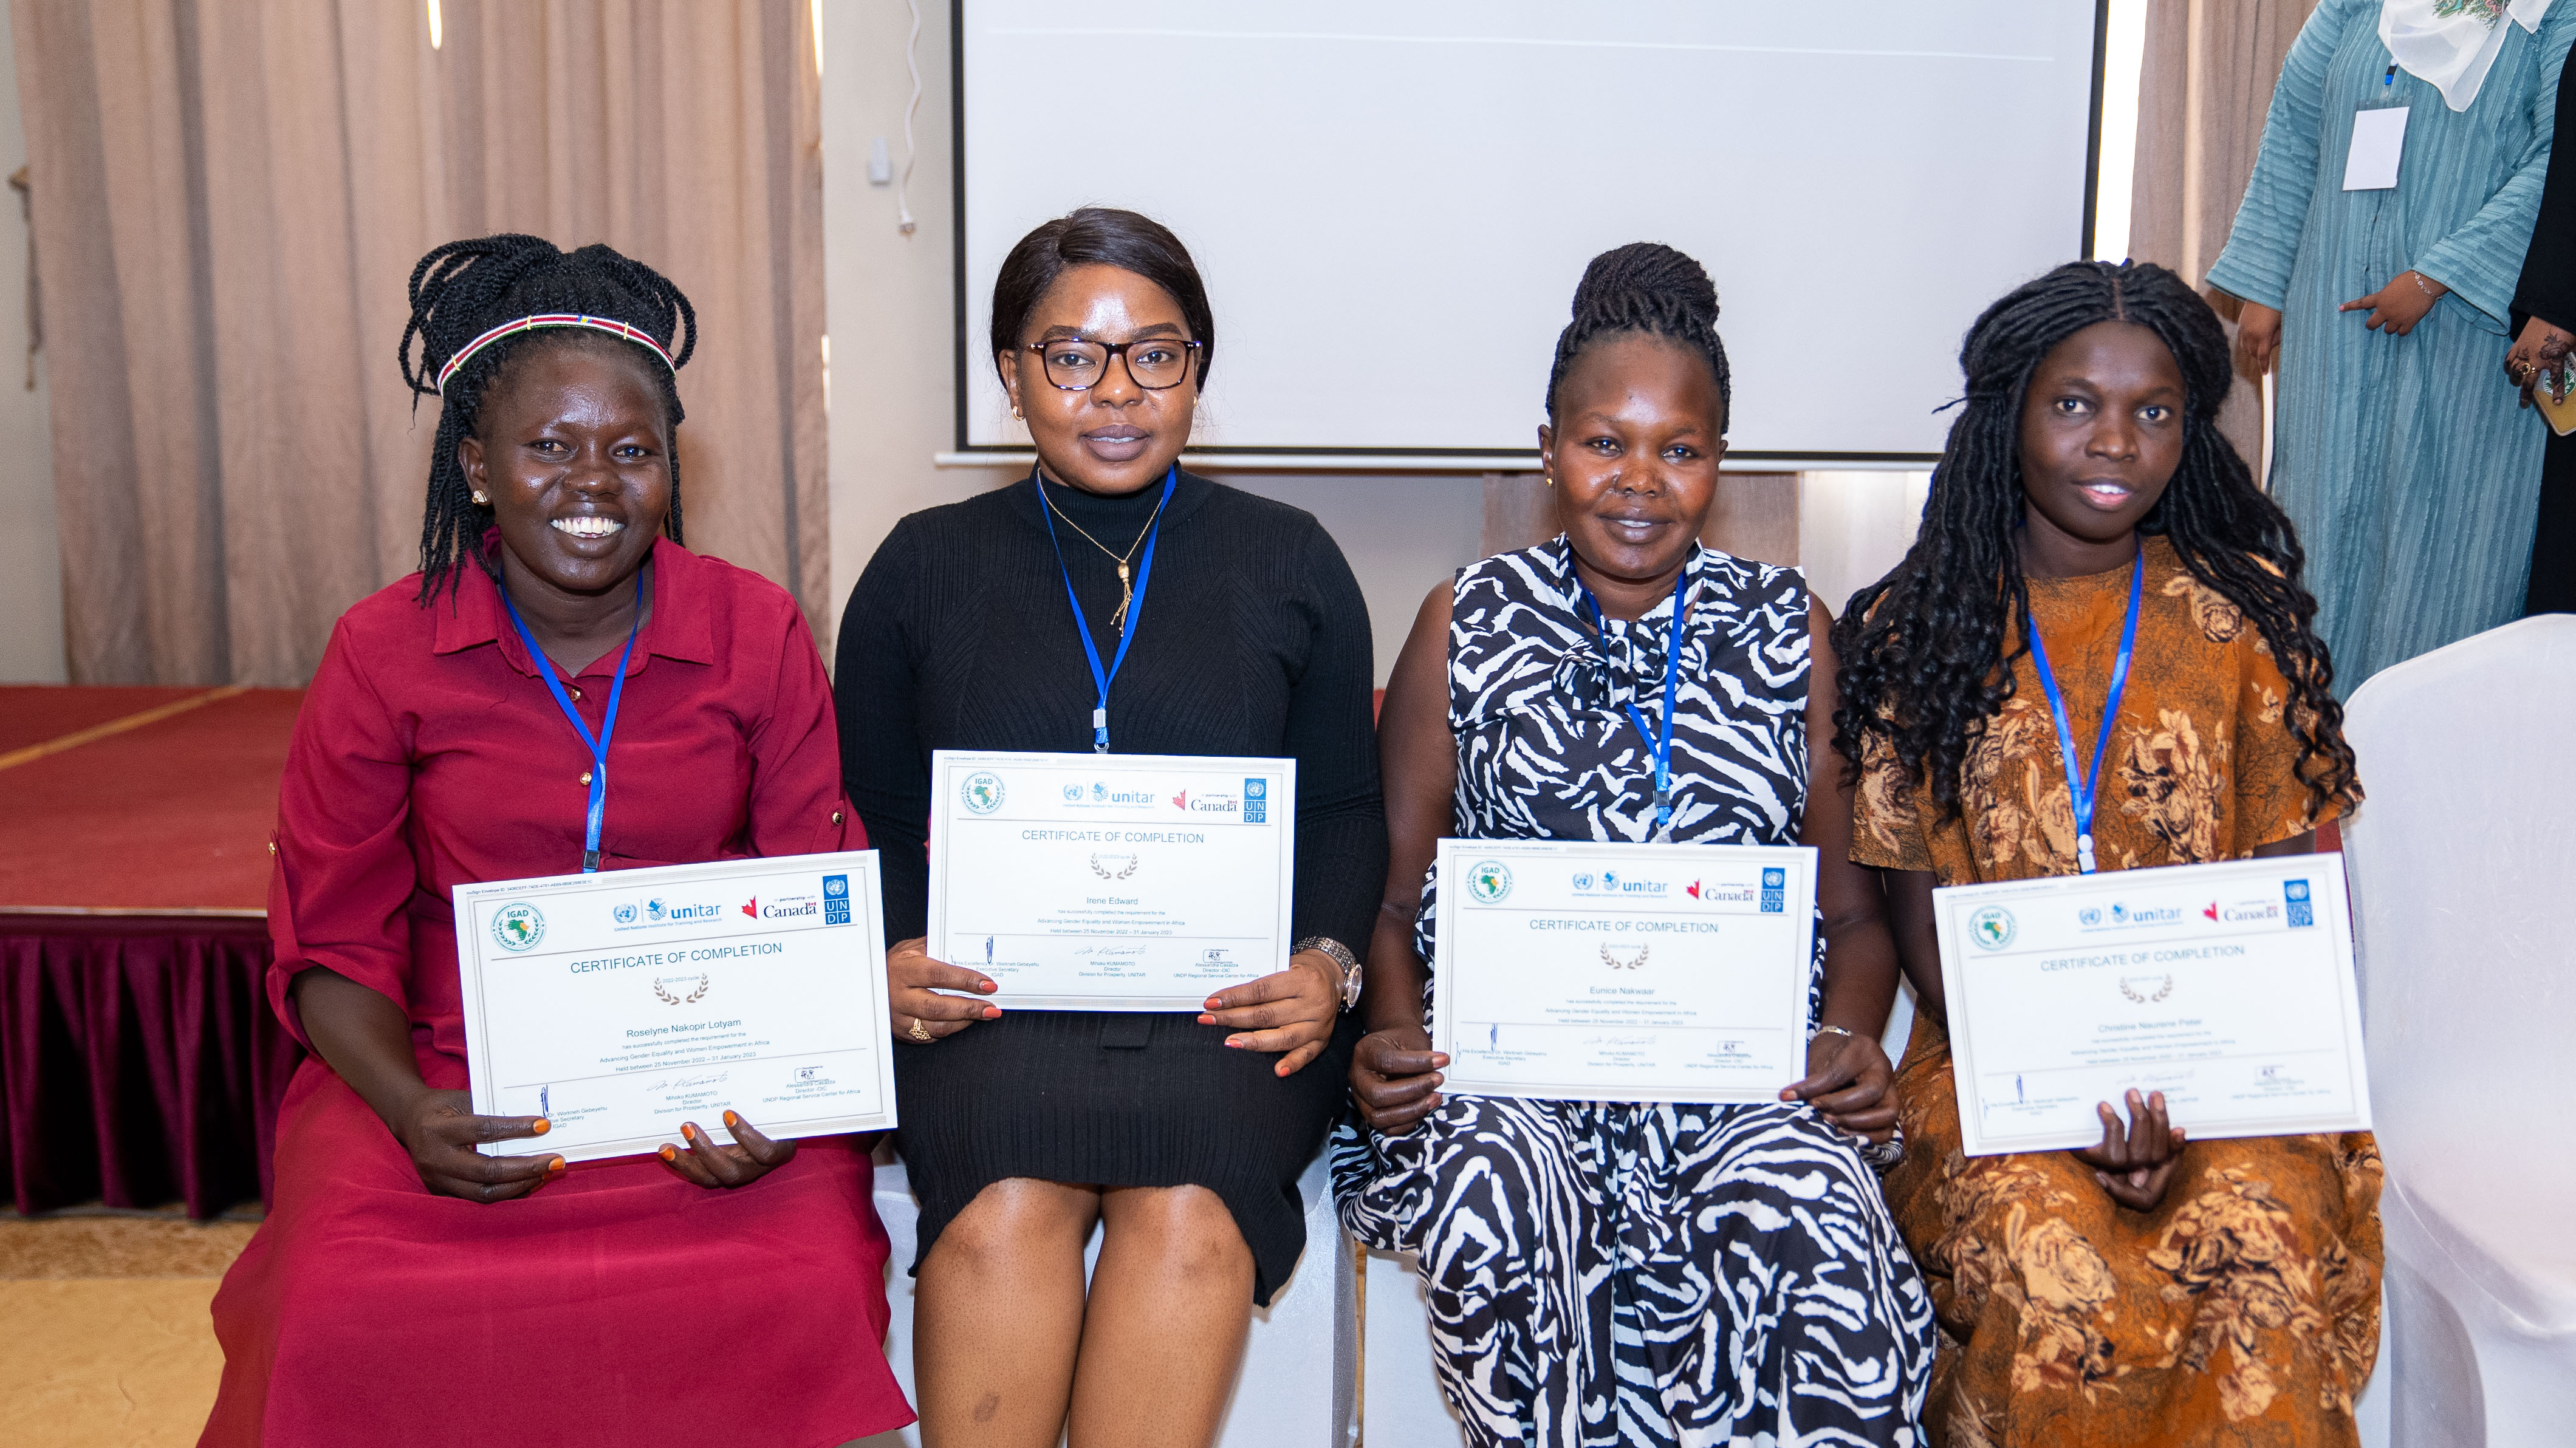 Call for Applications: Advancing Gender Equality and Women Empowerment 2023  Entrepreneurship and Financial Literacy Training Programme